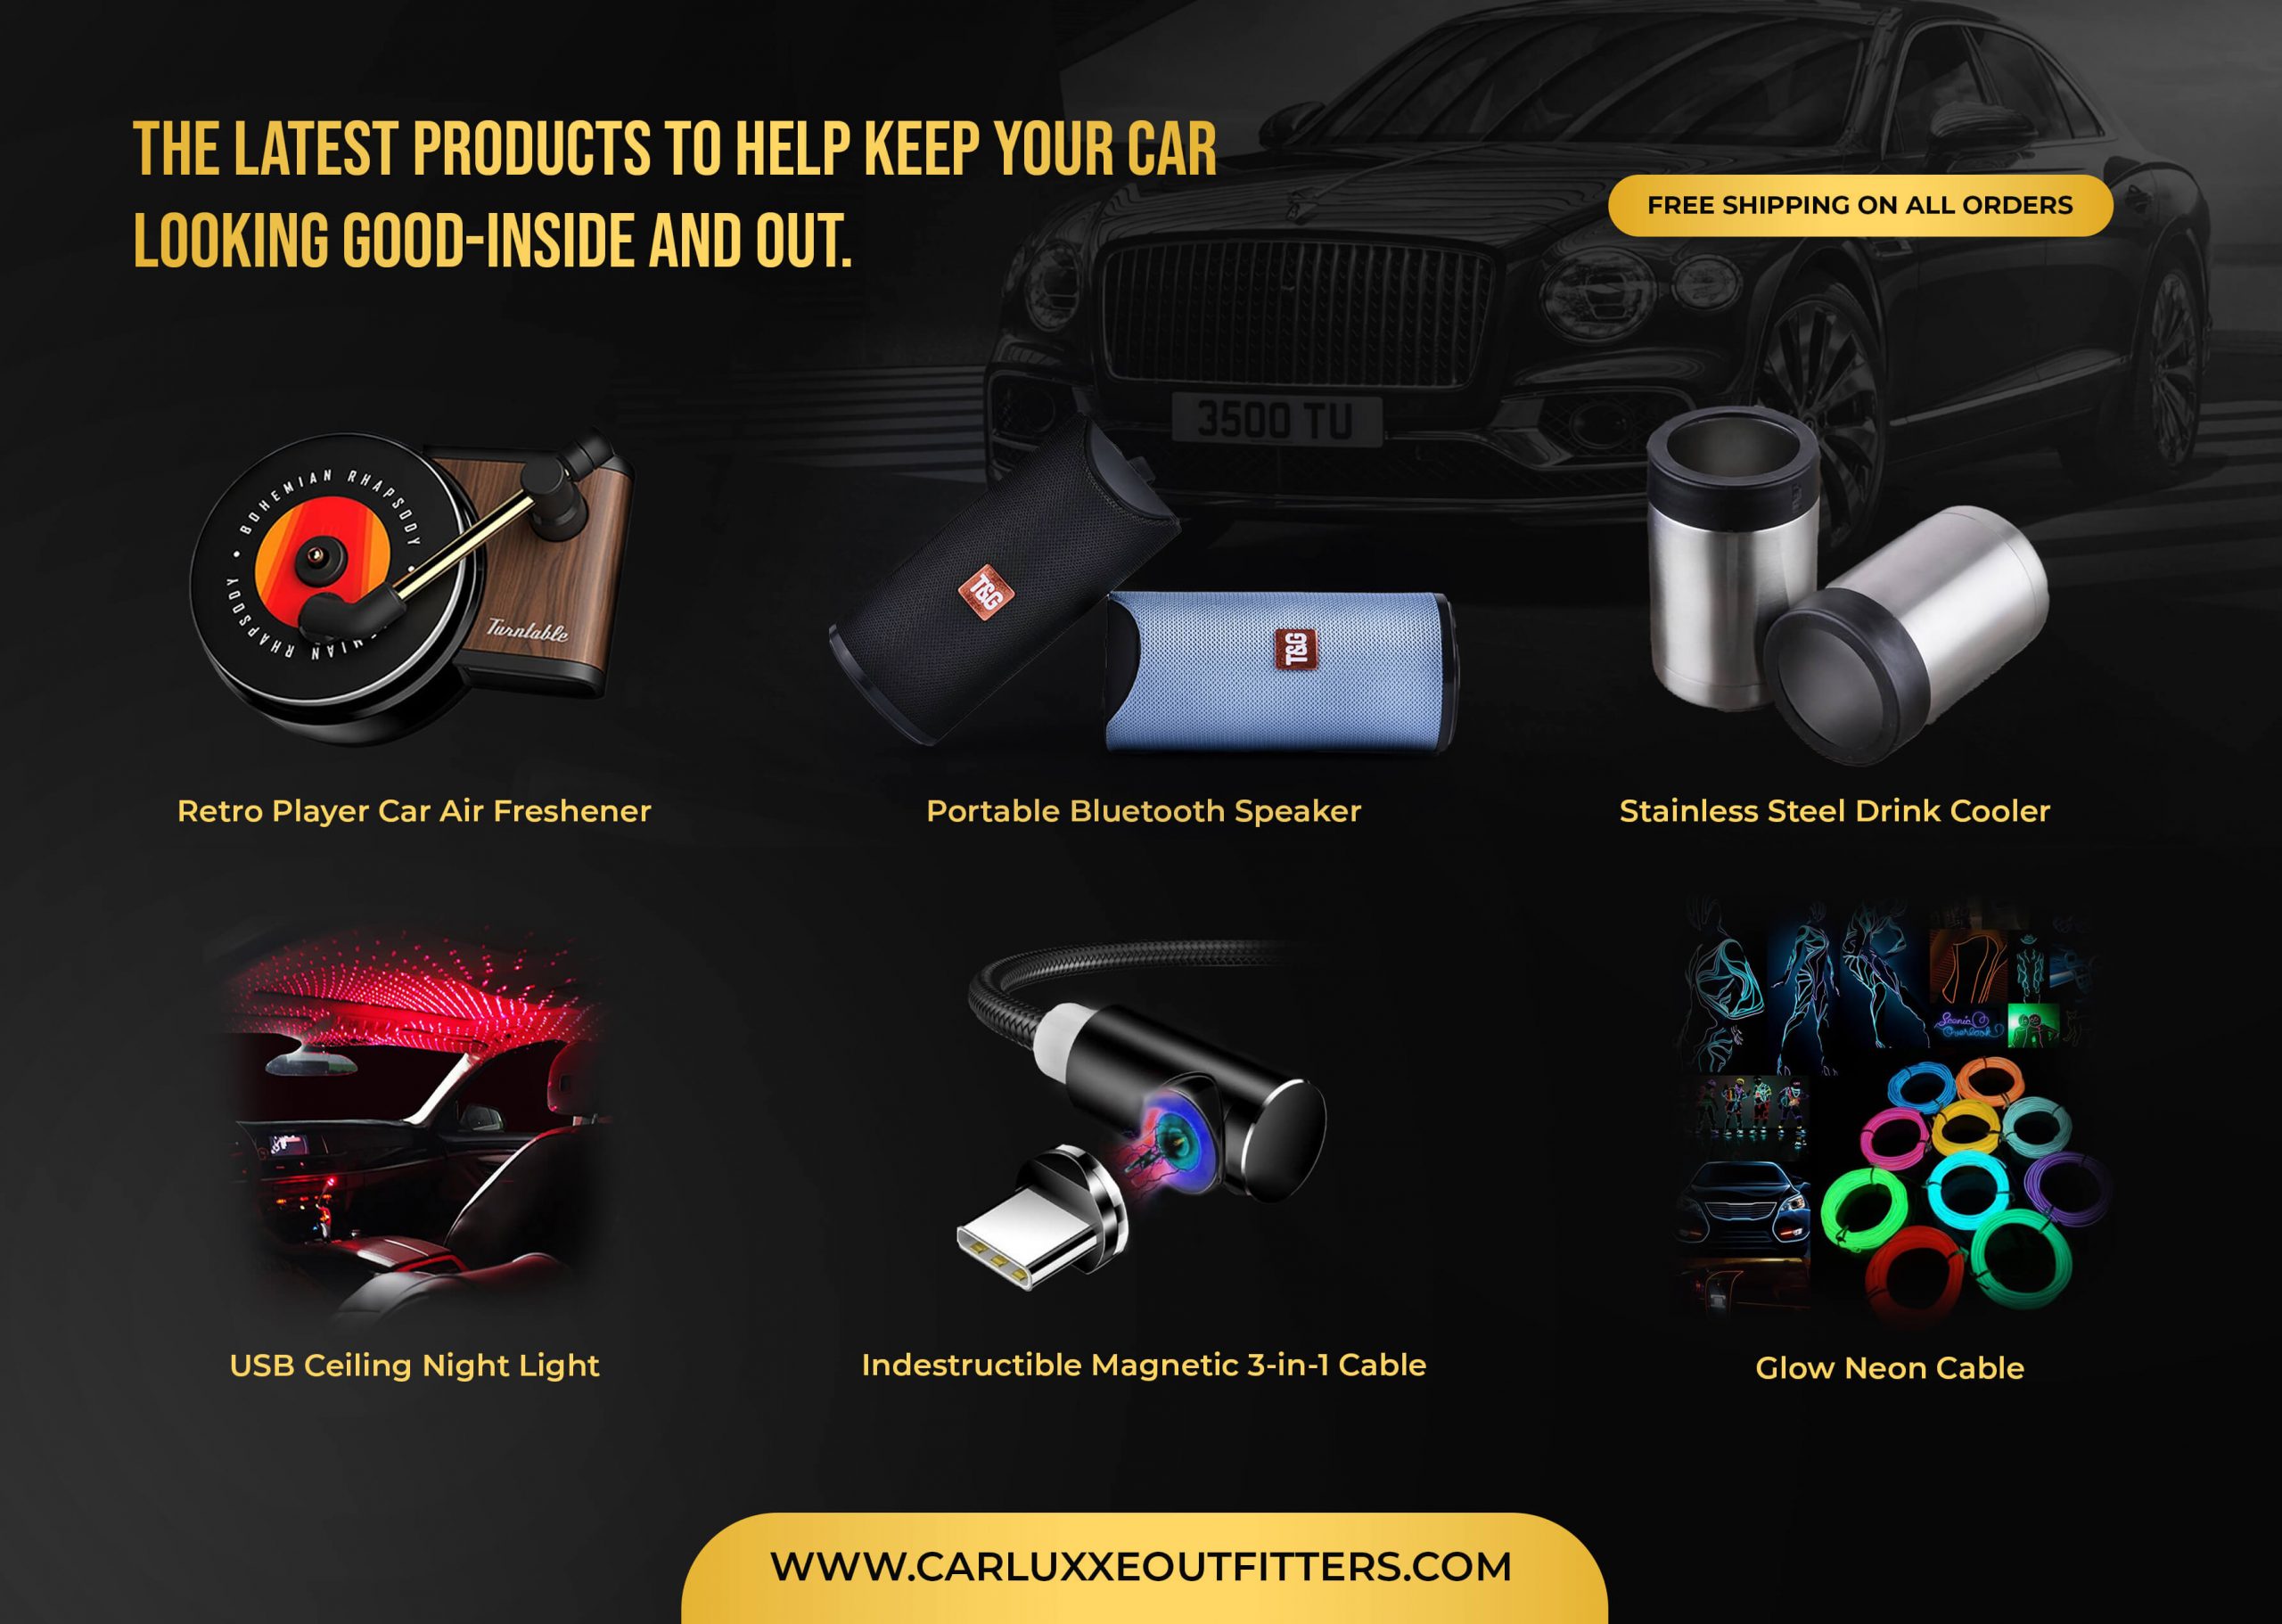 Carluxxe Outfitters A New Car Accessories Website - The Hype